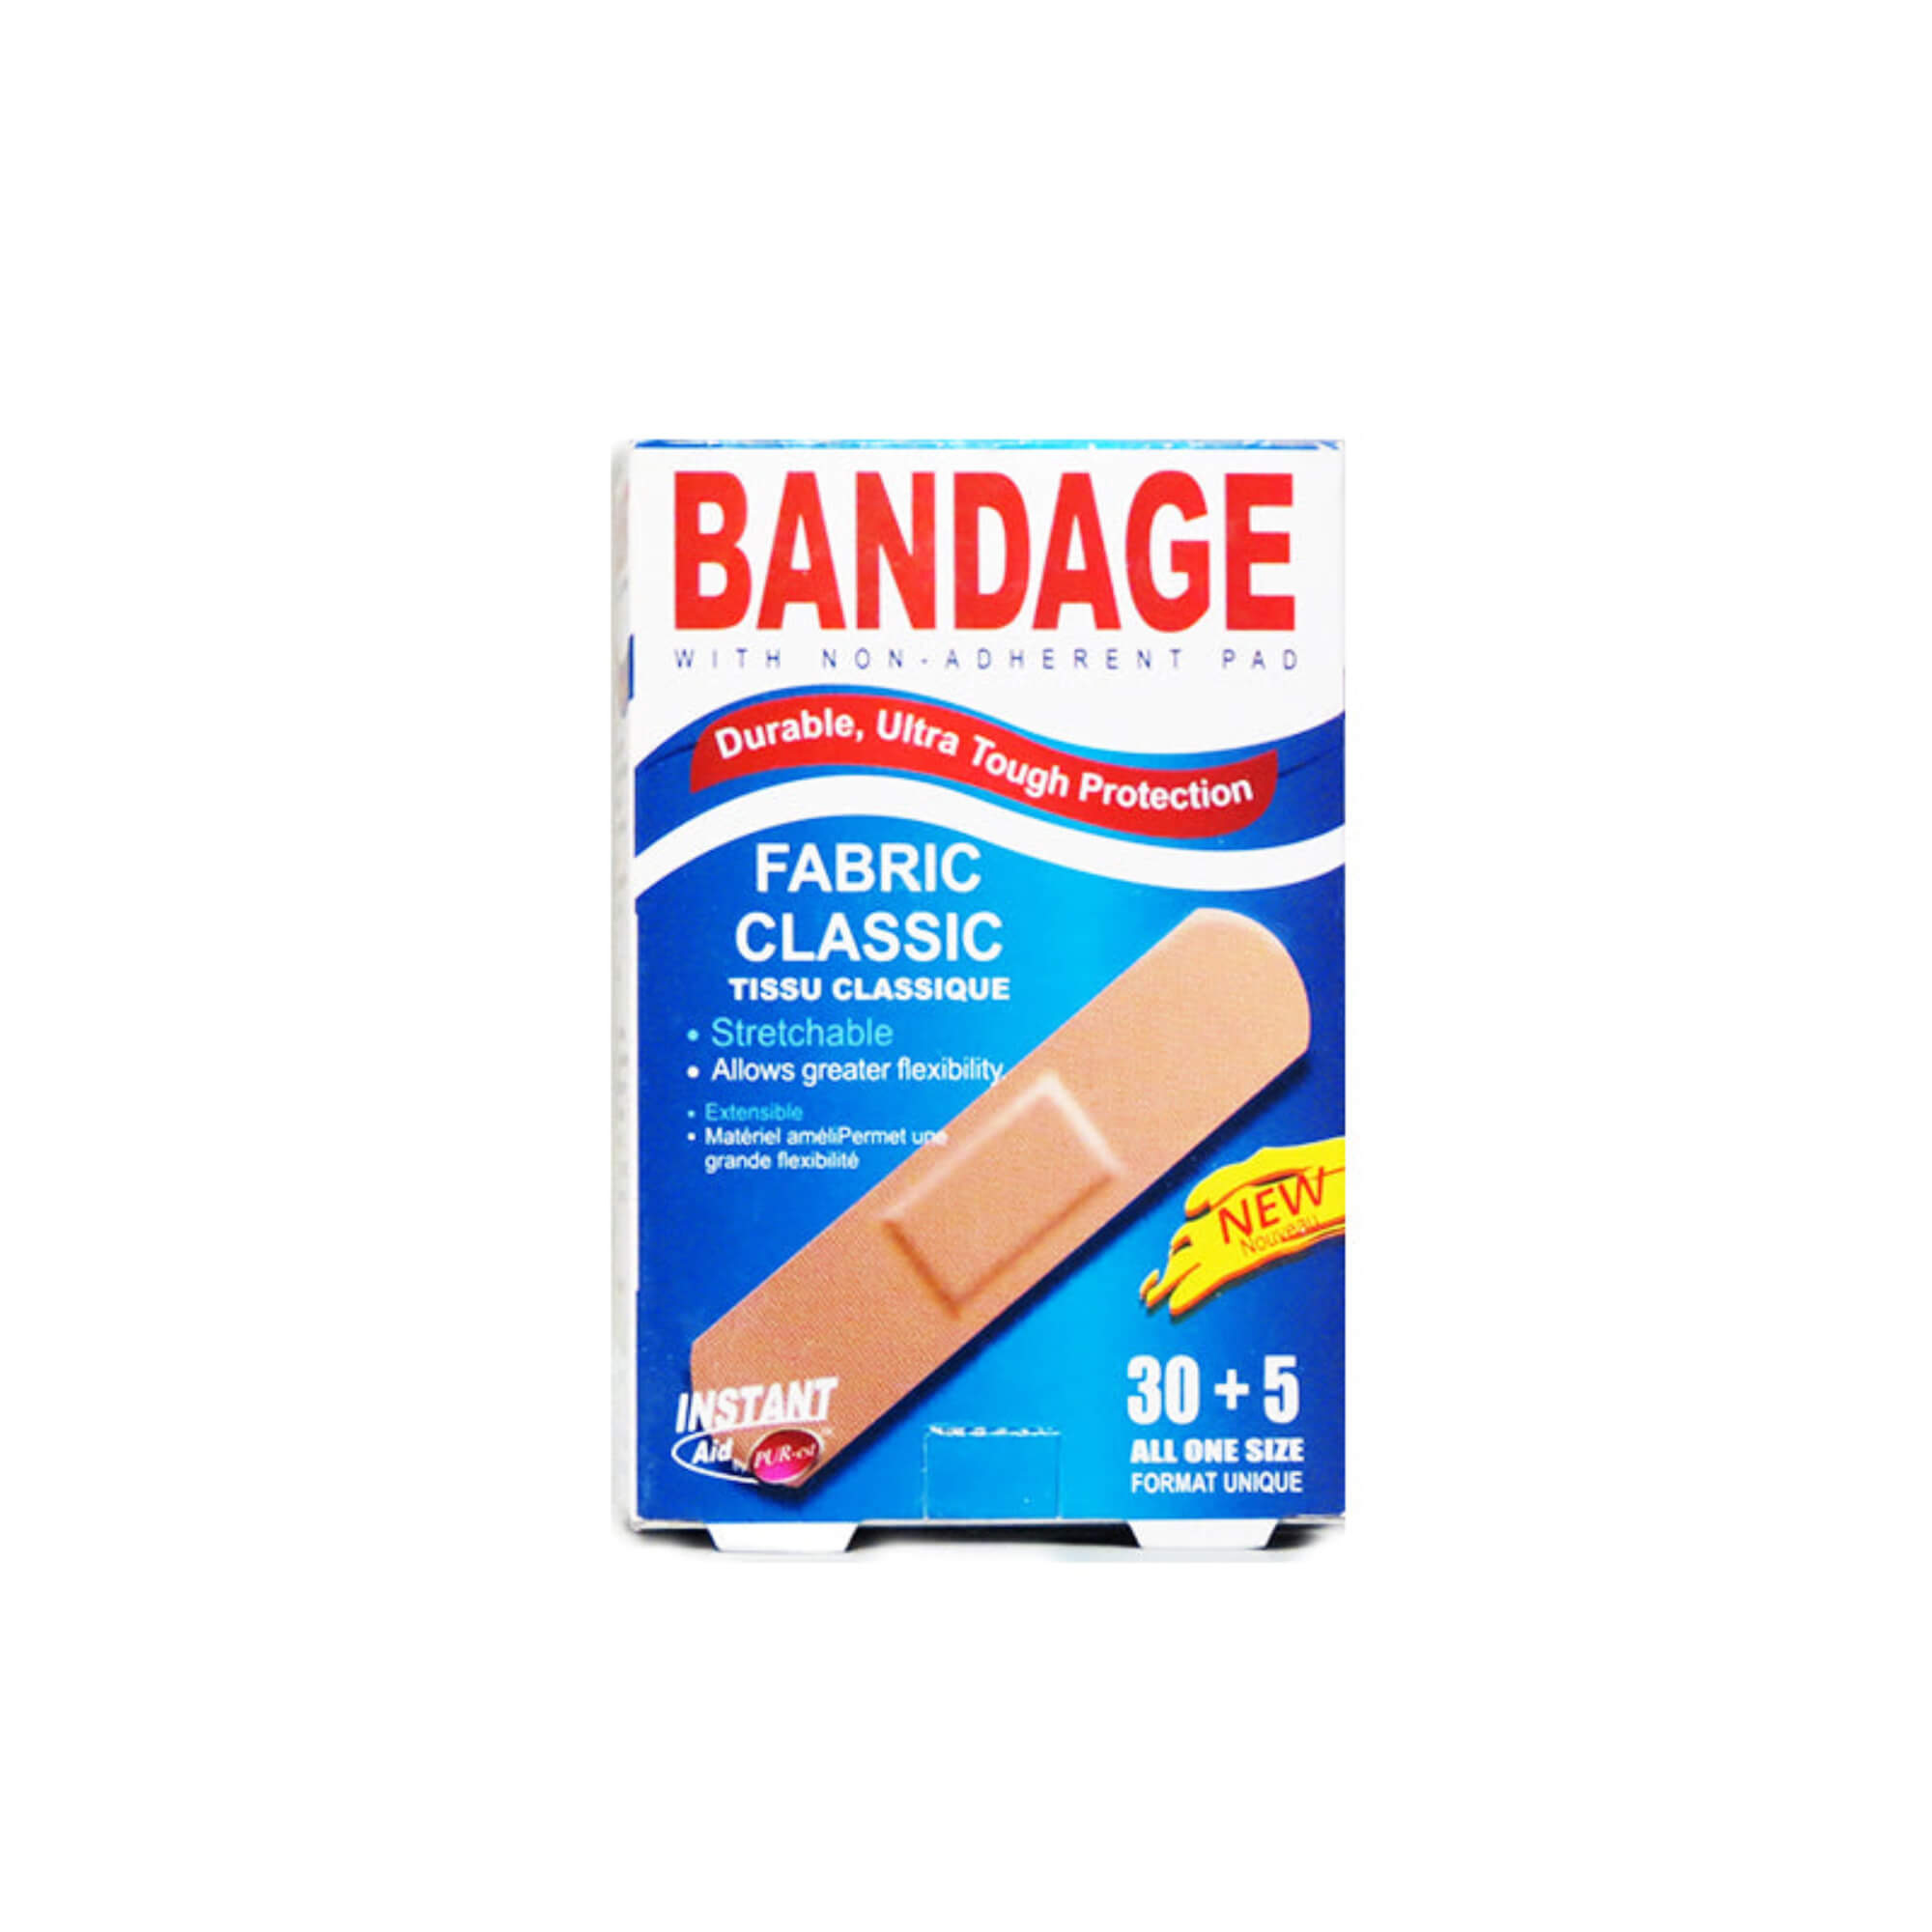 Instant Aid Fabric Classic Bandages 35 In 1 Pack - Pack of 3